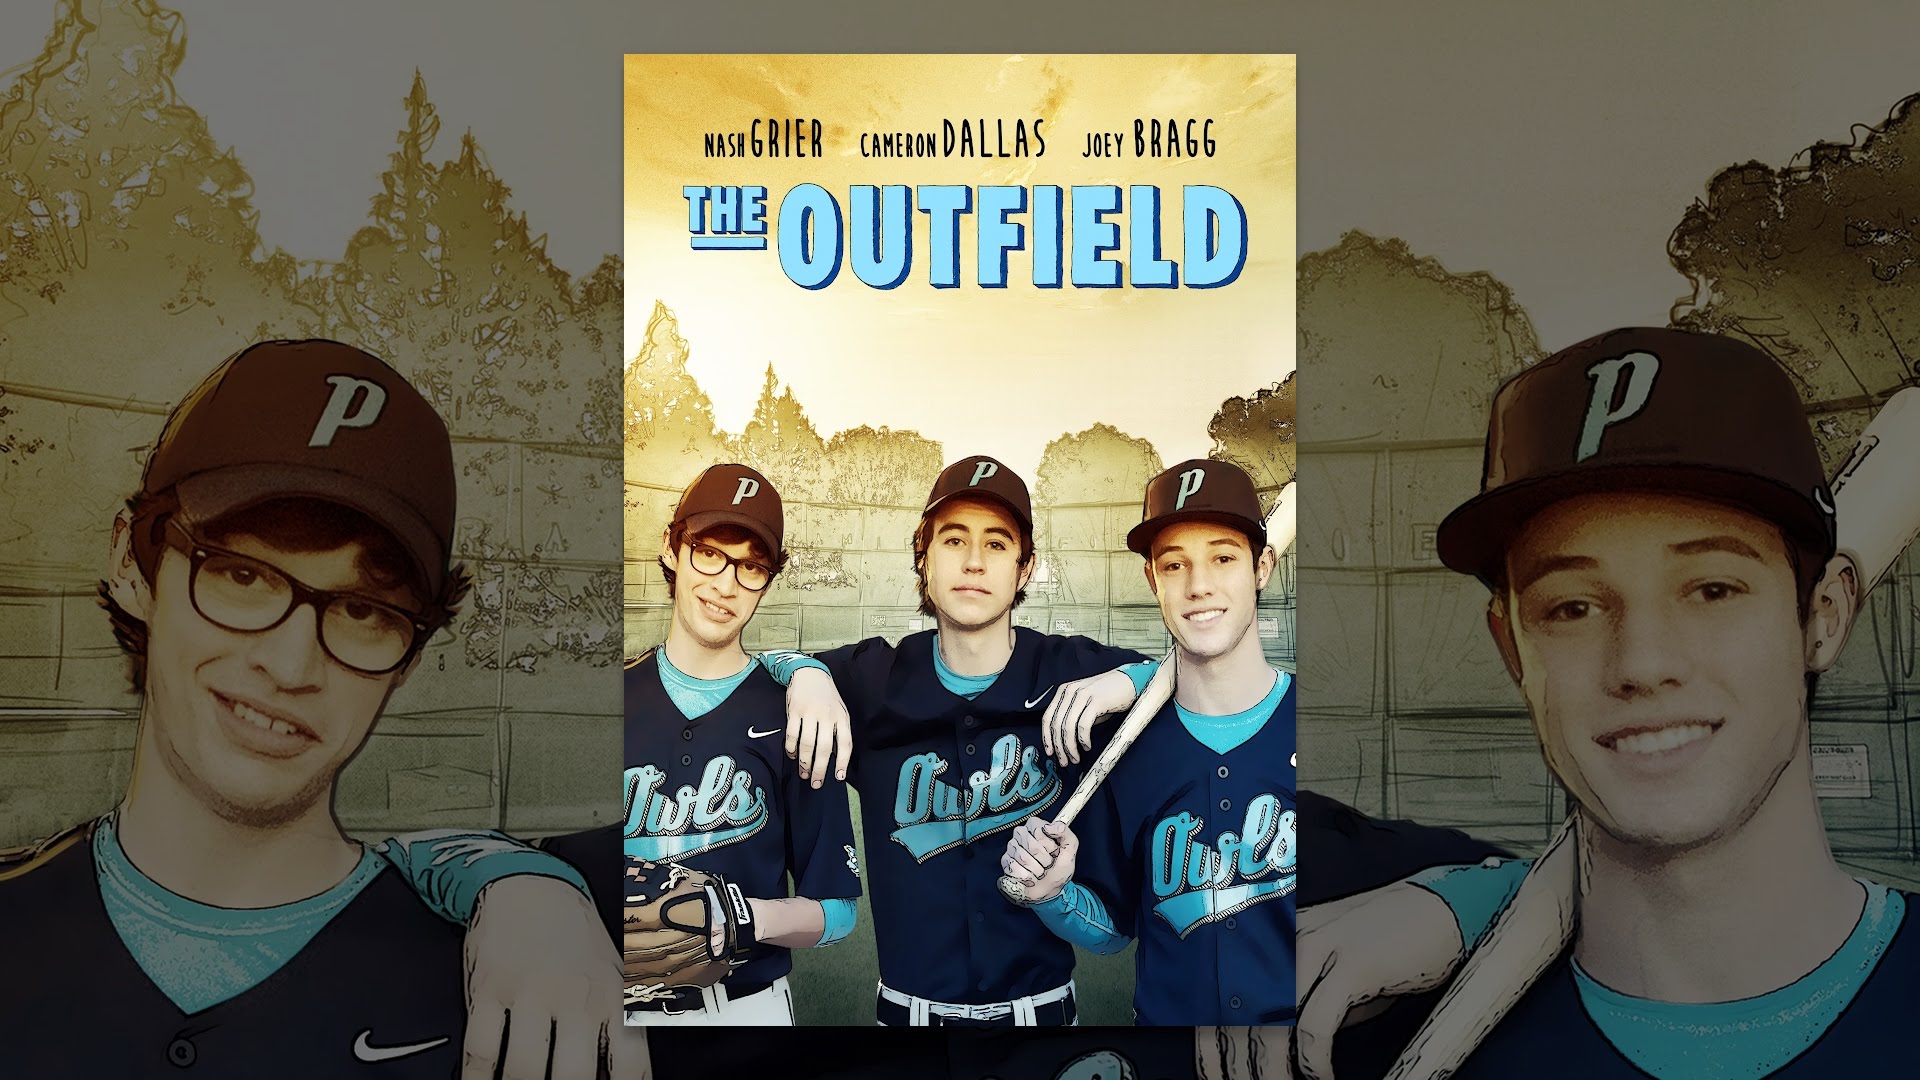 The outfield. Джон Спинкс Outfield. Тони Льюис Outfield. The Outfield Play Deep. The Outfield your Love.